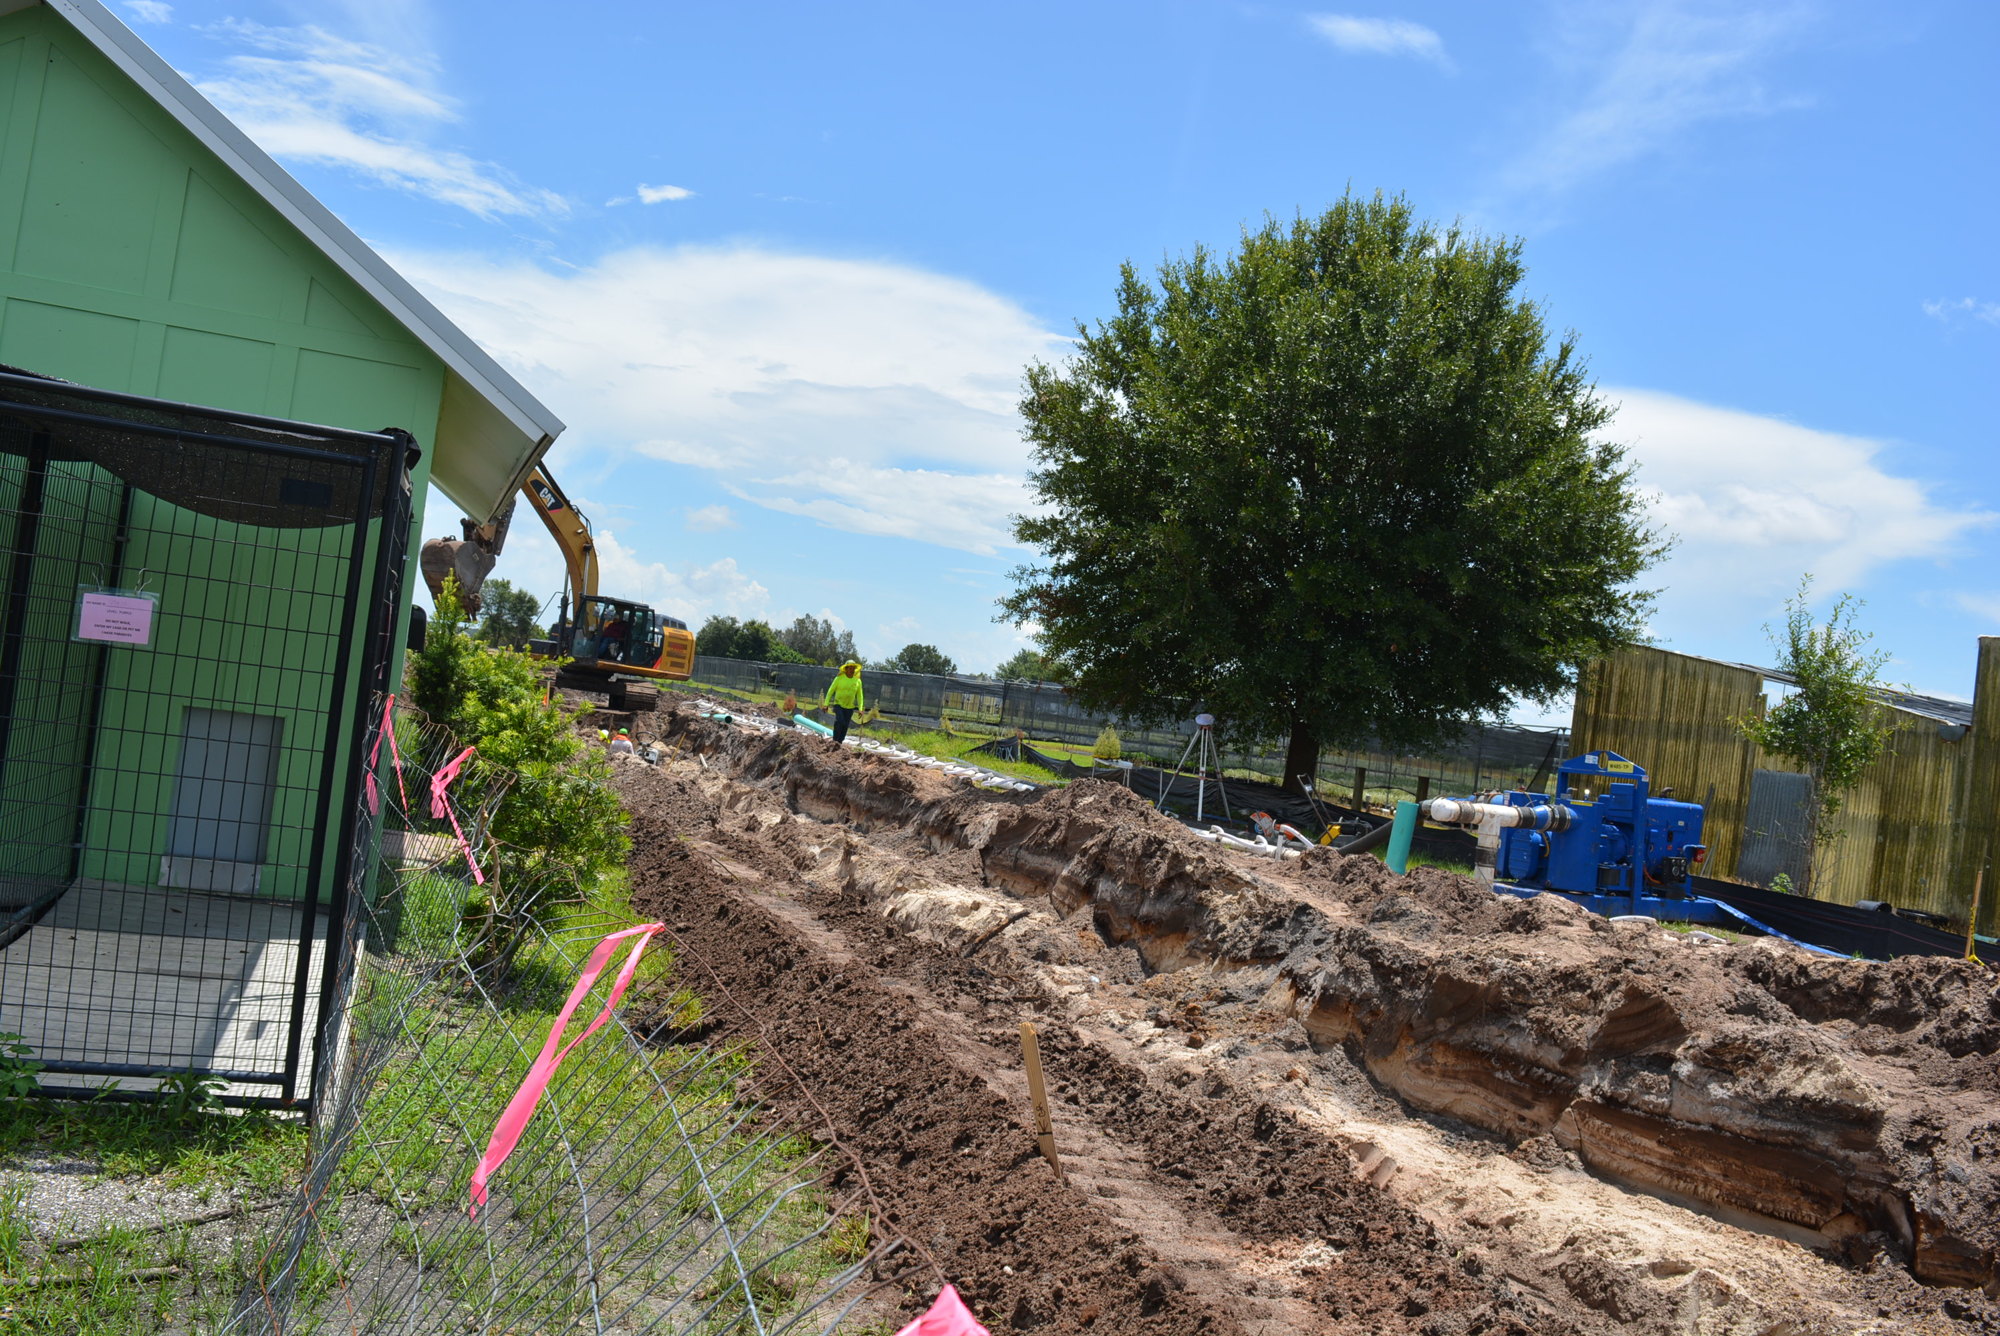 Crews currently are working to install water and sewer connections along the property boundary.